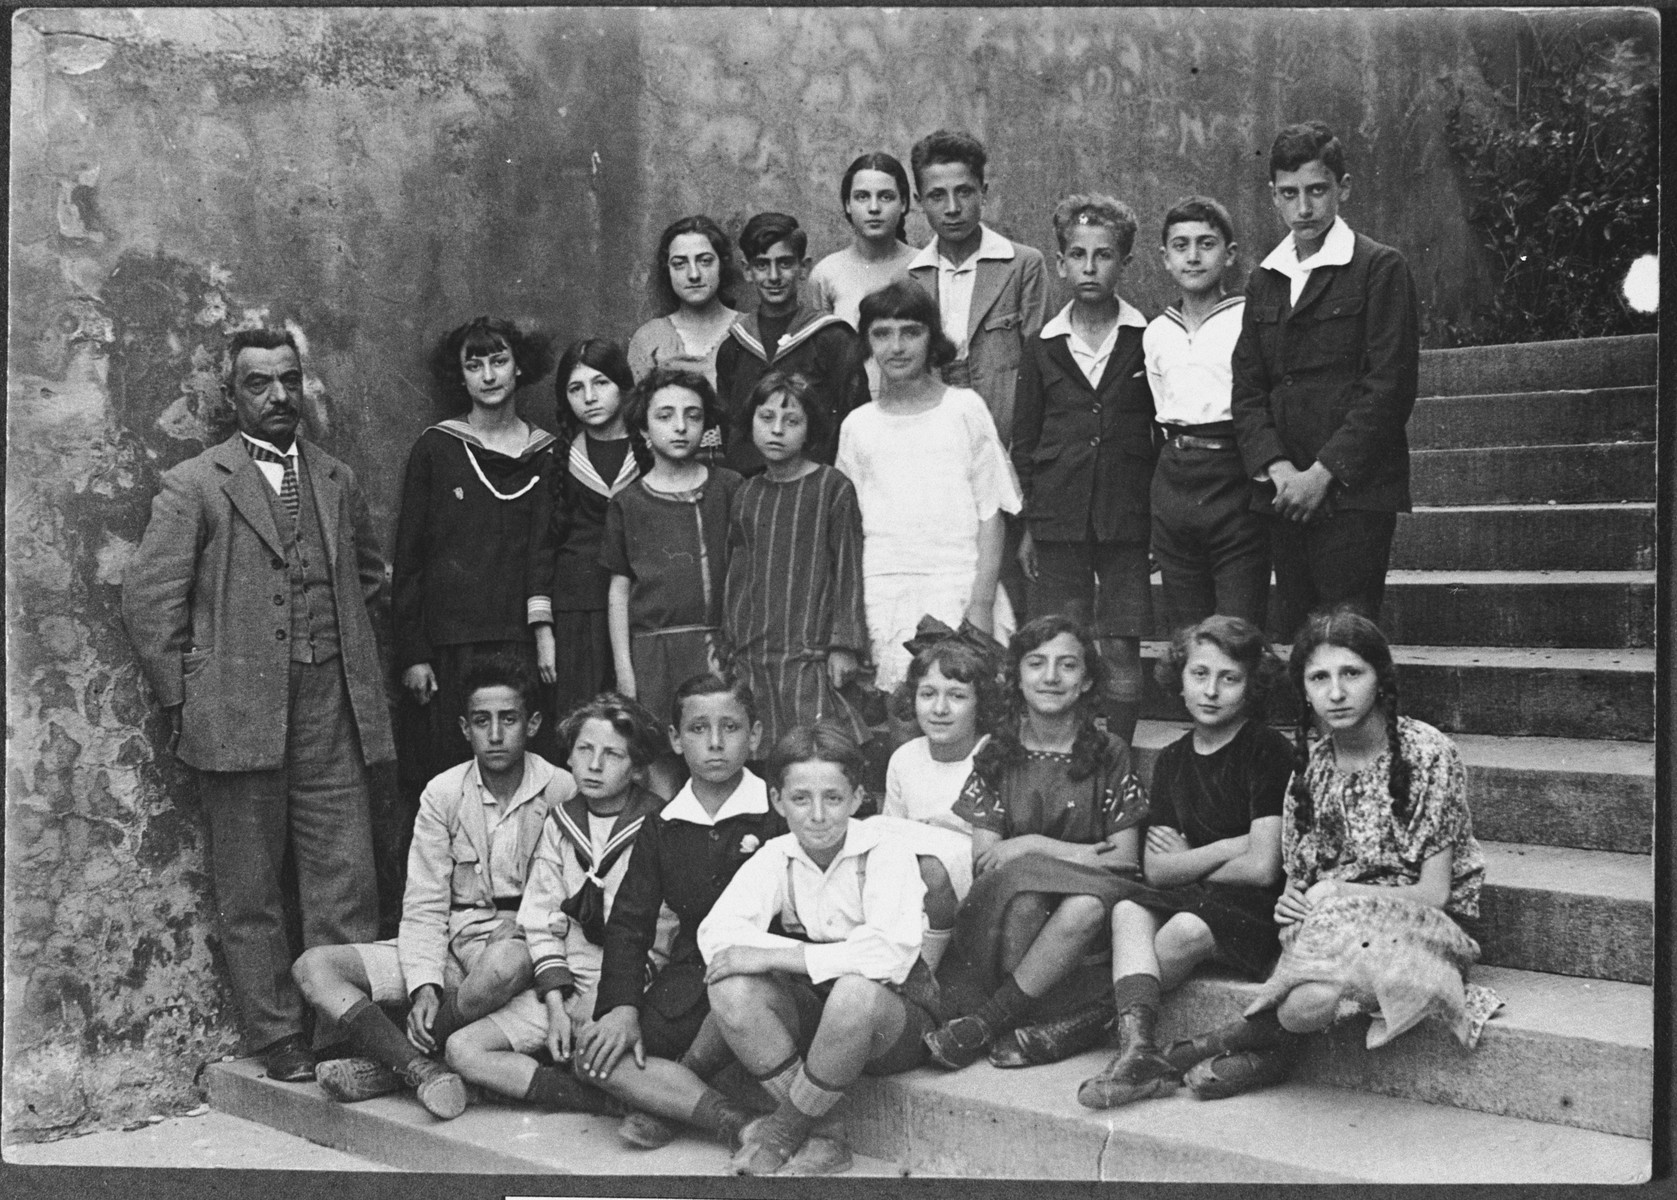 Class photo of school children in Florence, Italy.

Those pictured include Anna DiGioacchino.